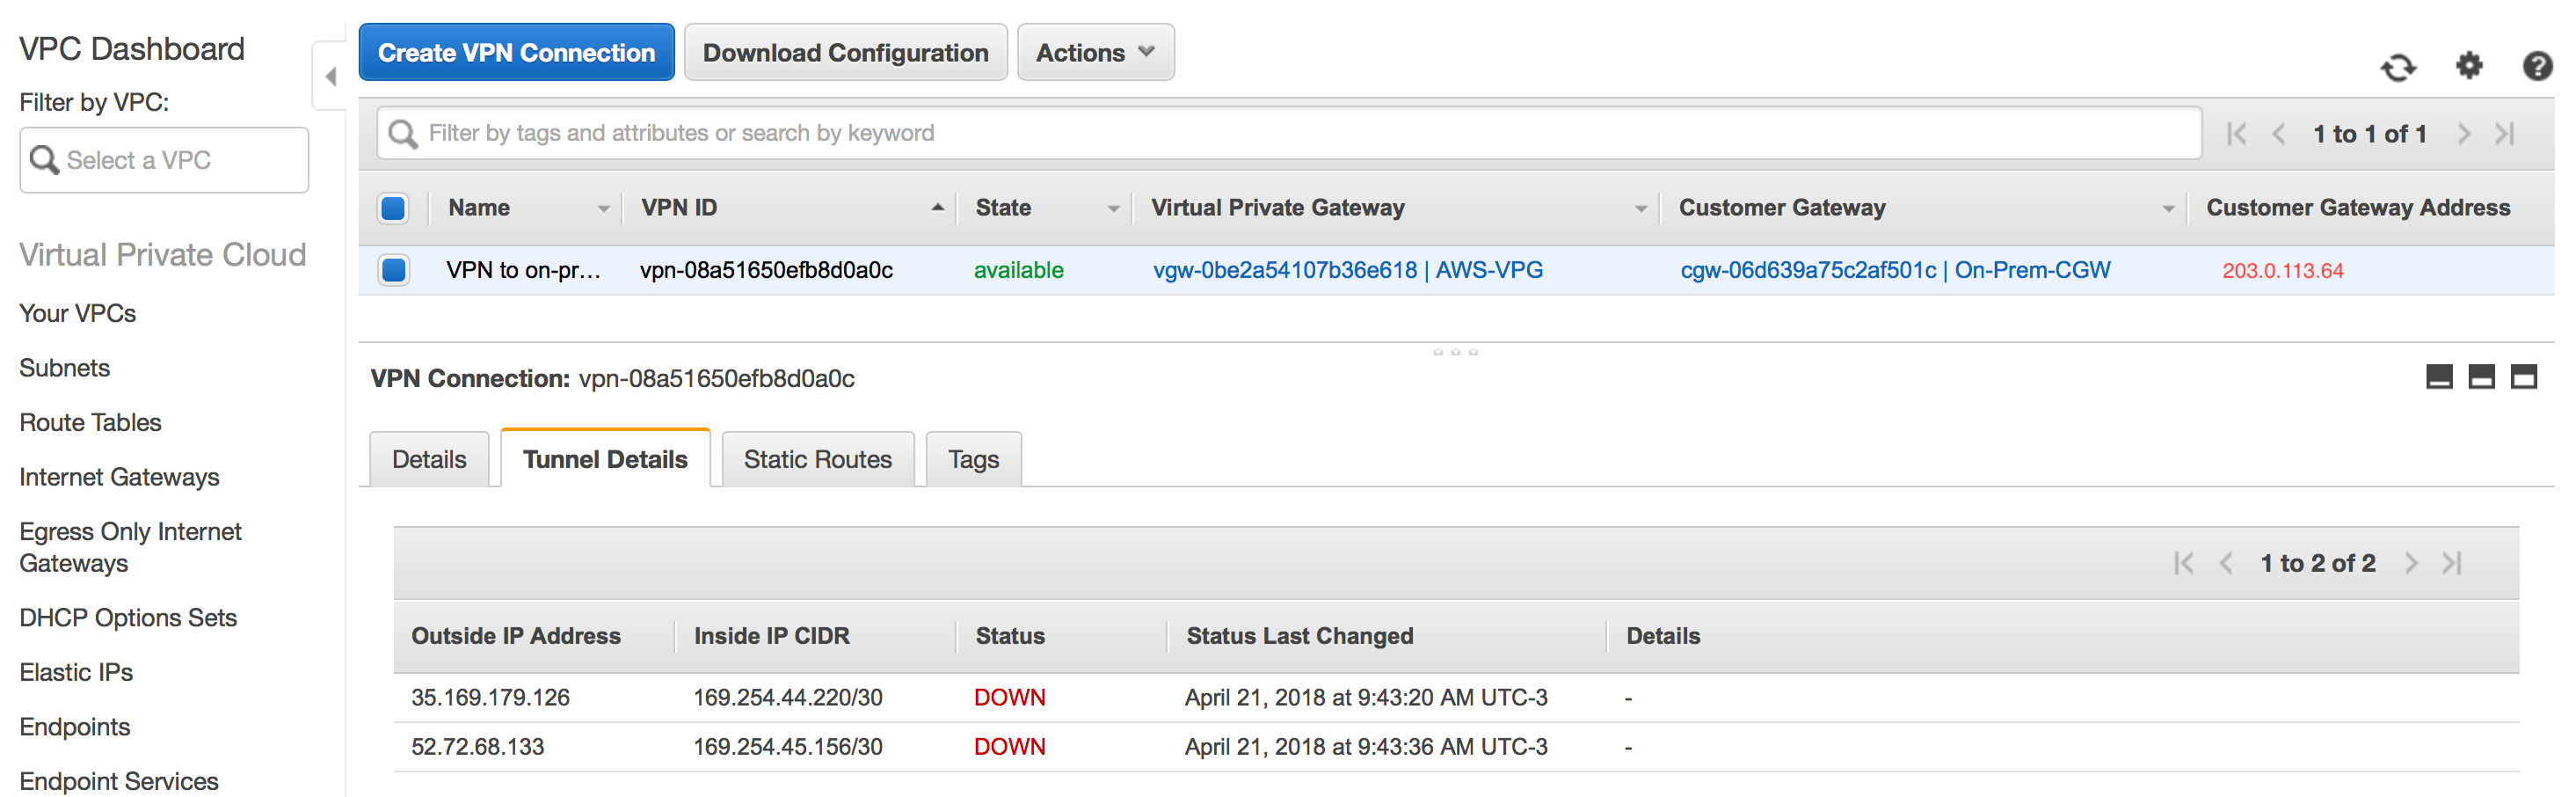 AWS VPN sample configuration once complete.